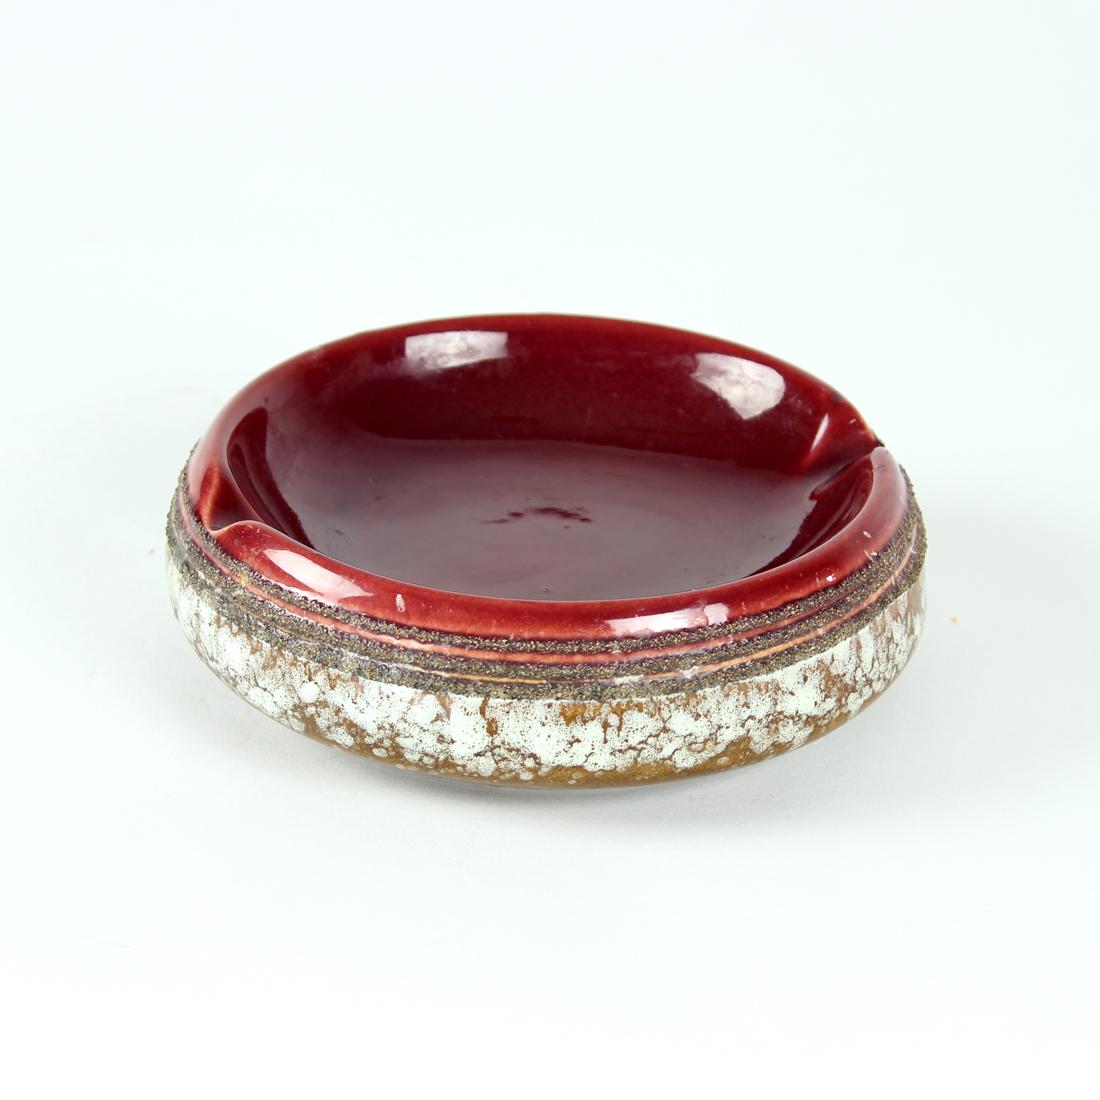 Beautiful piece of mid-century design. This is a ceramic ashtray in an elegant design and an interesting color combination. Deep dark reds in glaze finish are mixed with the brown and rough surface. The mixture of materials makes the ashtray easy to